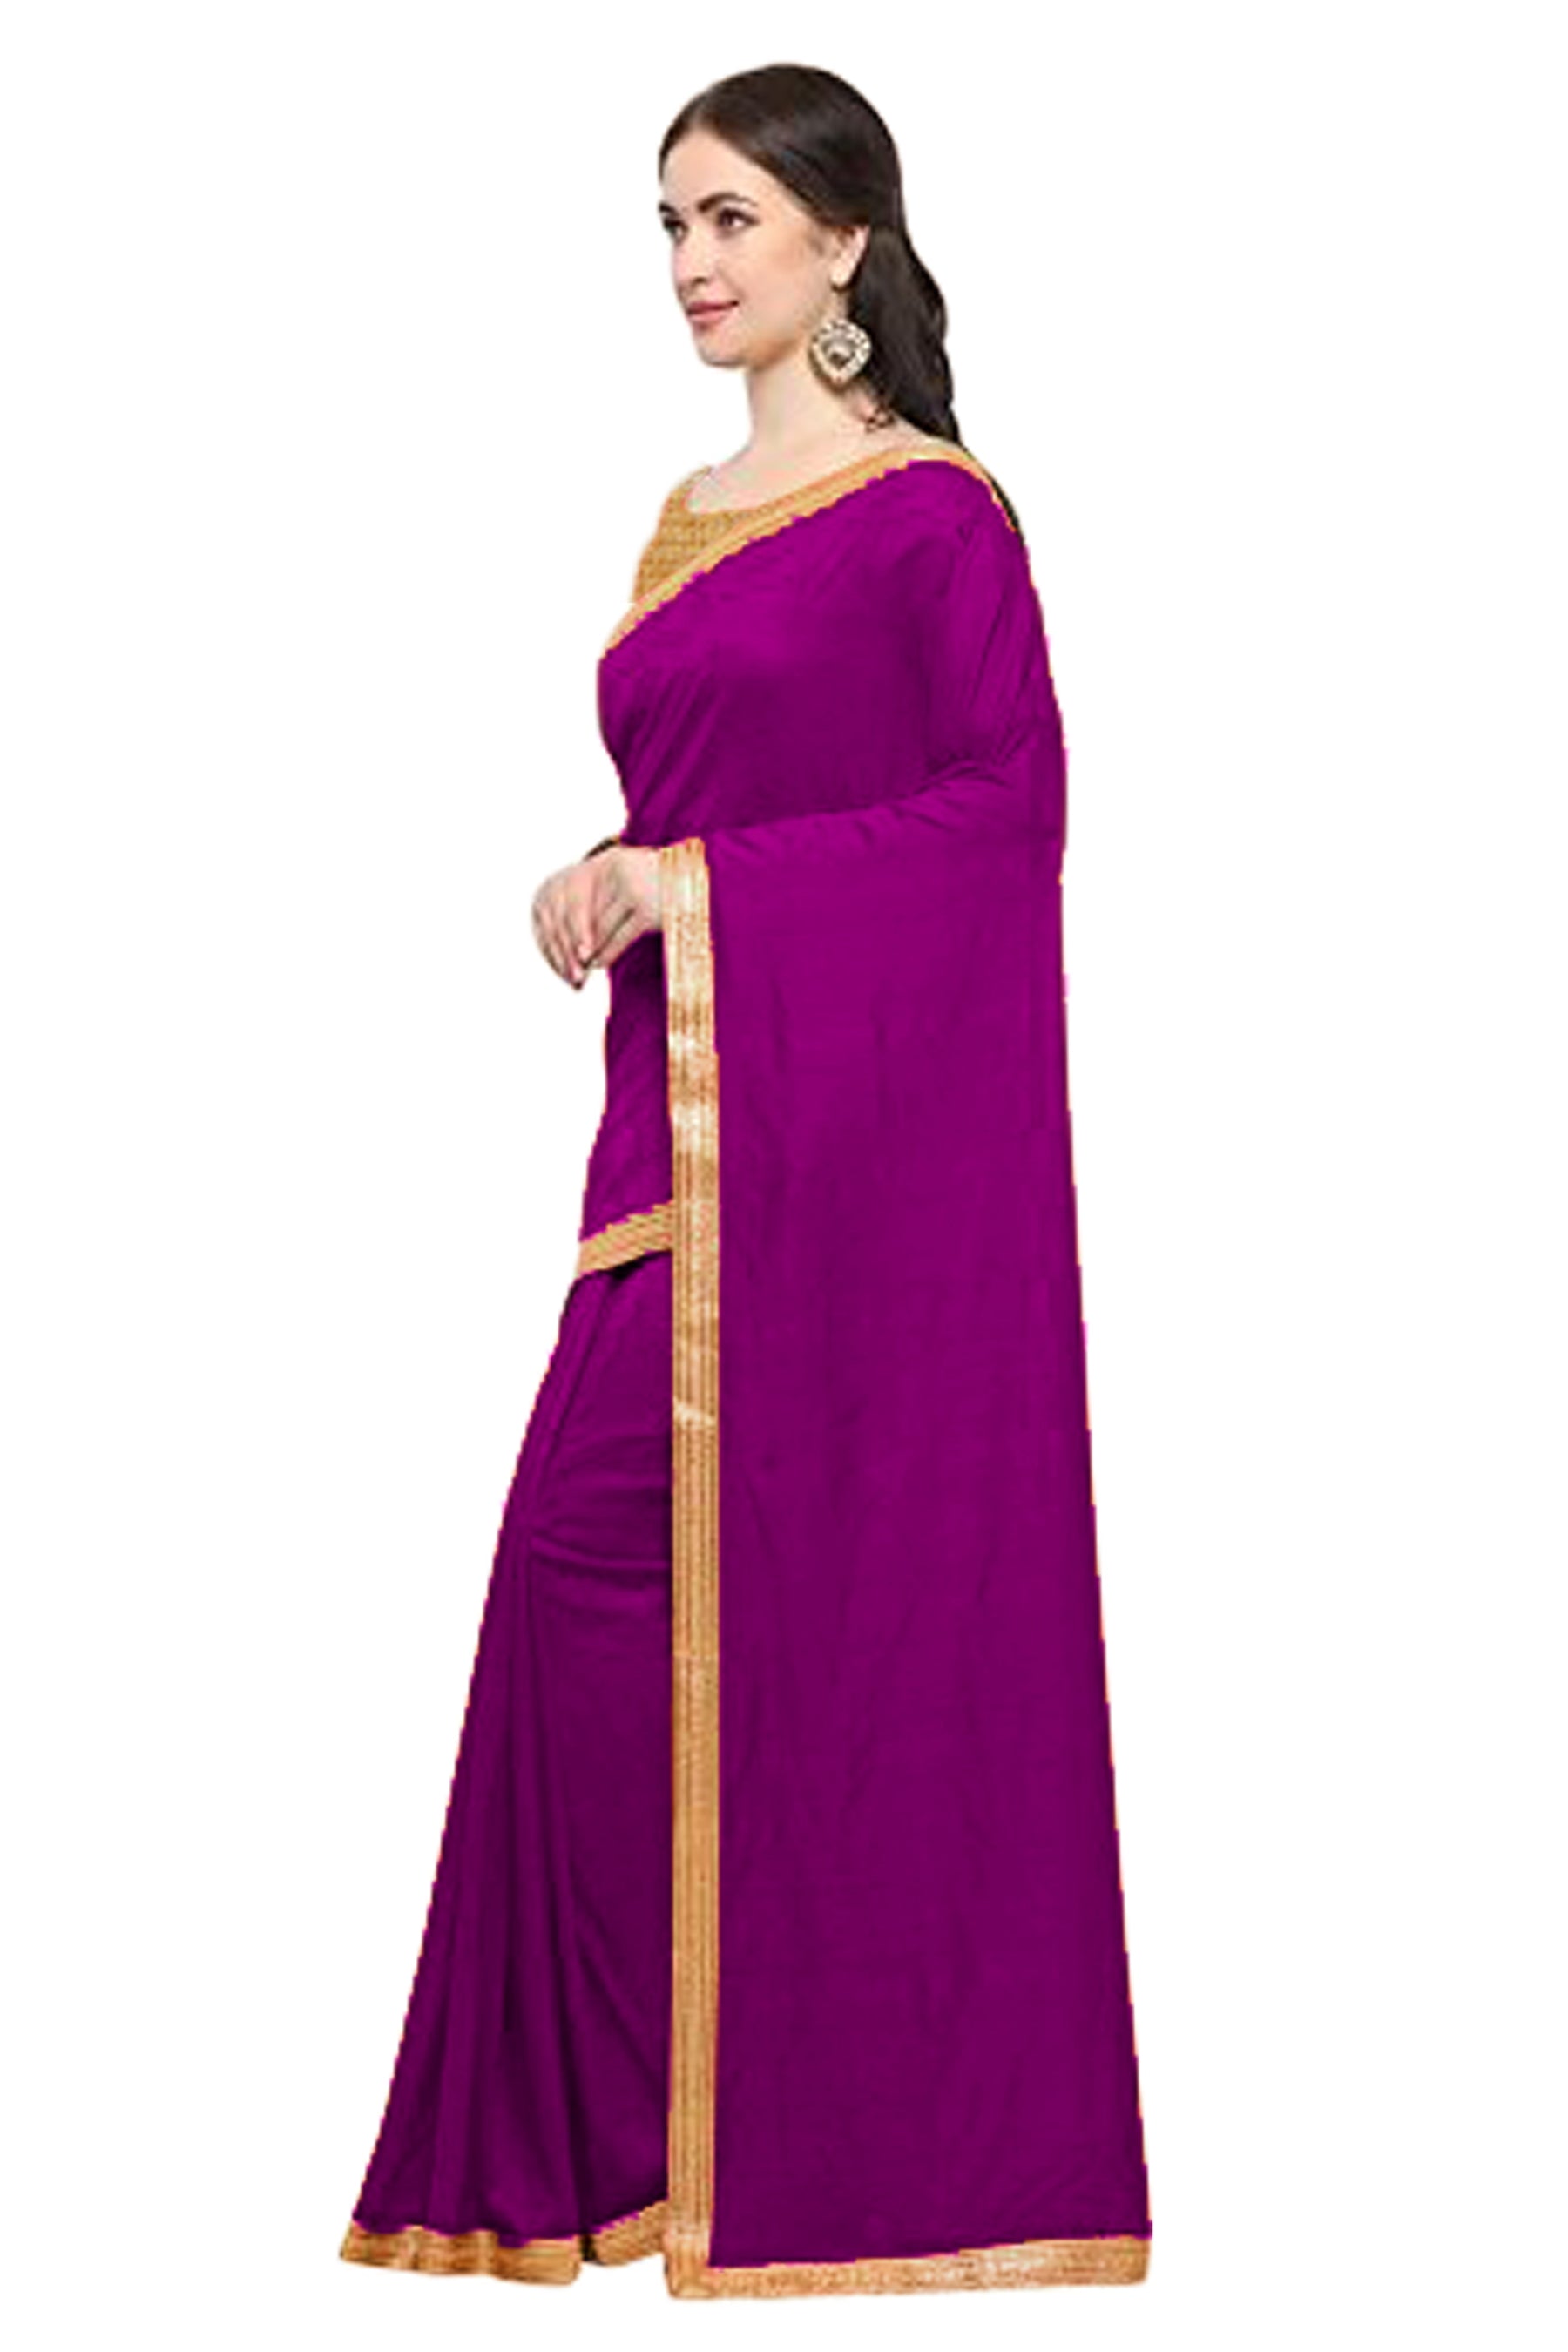 Women's self Woven Solid Occasion Wear Georgette Heavy Border Sari With Blouse Piece (Purple) - NIMIDHYA